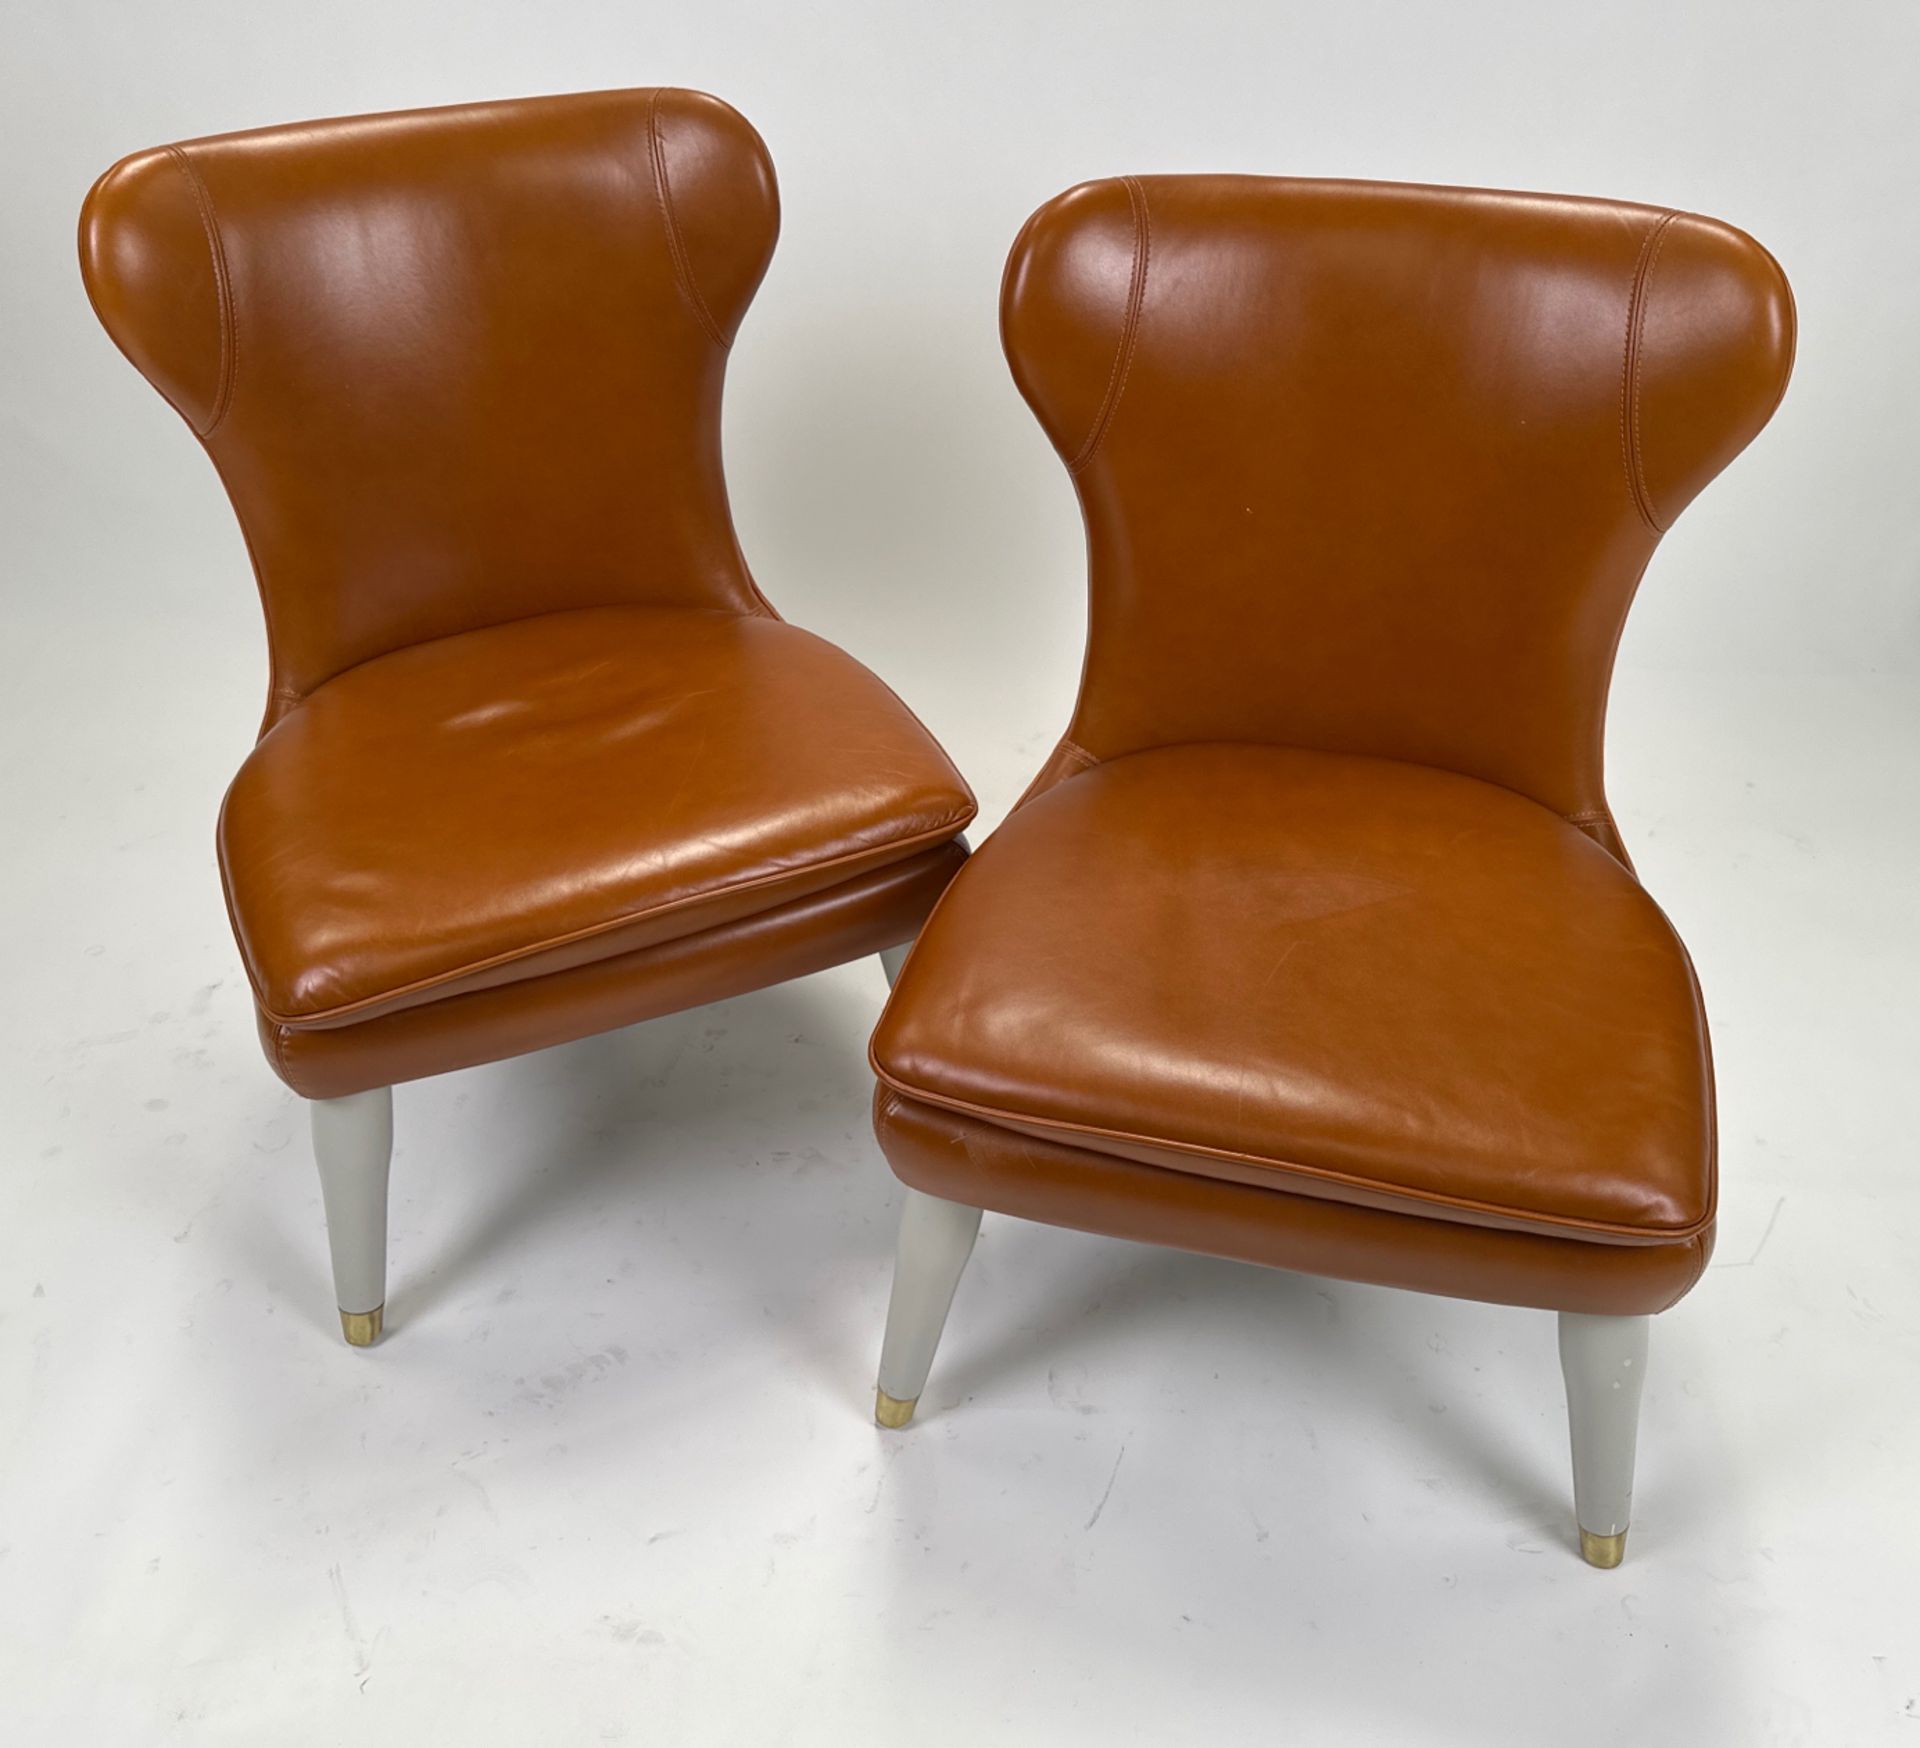 Pair of Ben Whistler Chairs Commissioned by Robert Angell Designed for The Berkeley - Image 2 of 3